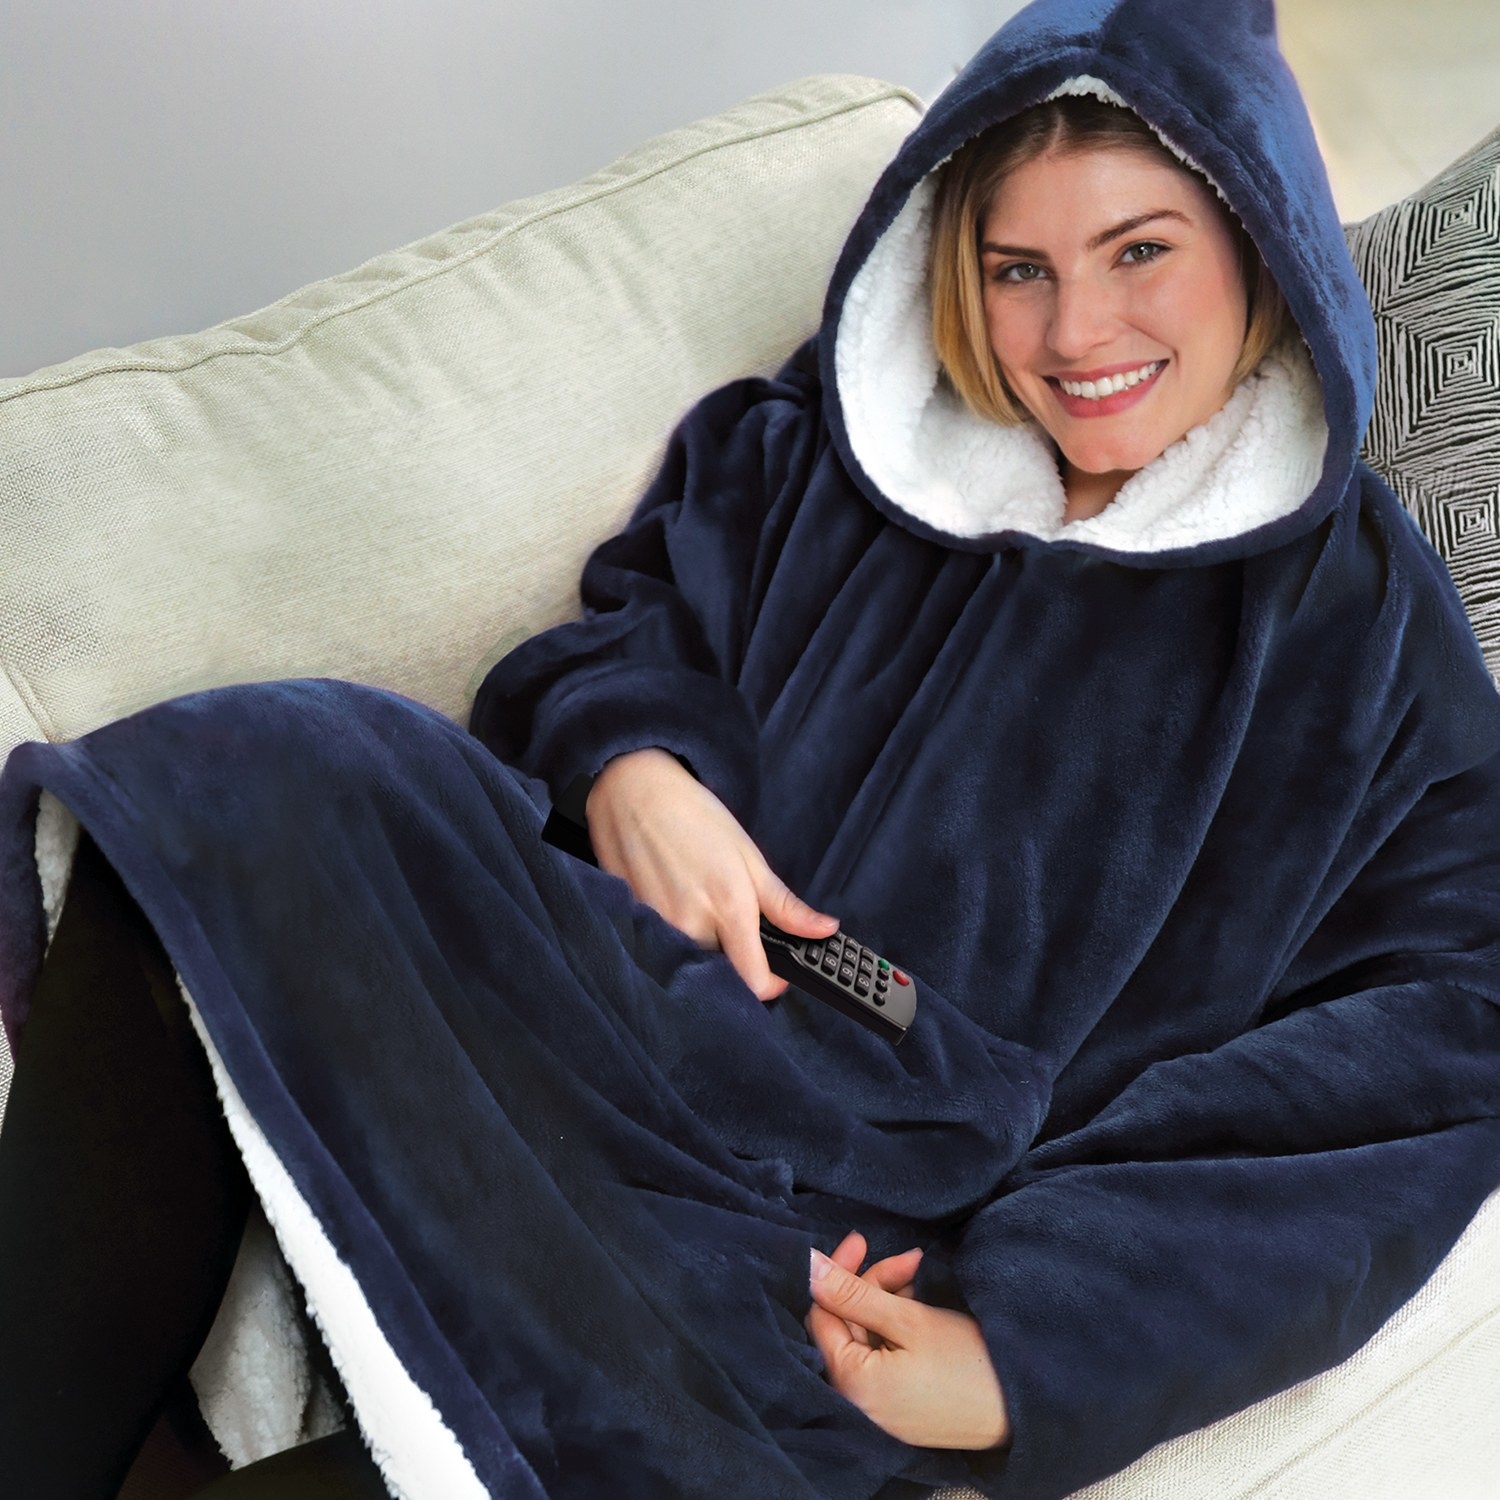 The robe worn by a model lounging on a couch